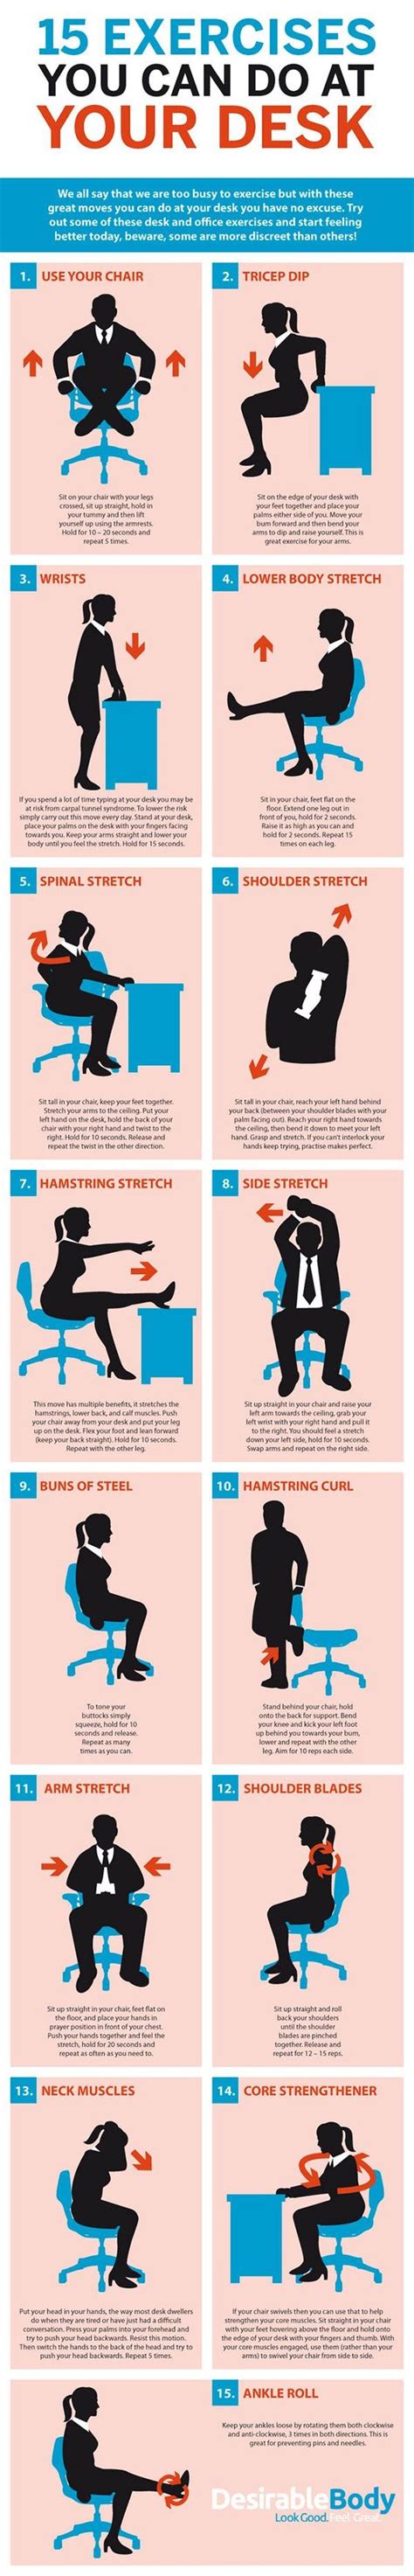 this graphic shows bunch of desk based exercises for the office health tips health and graphics